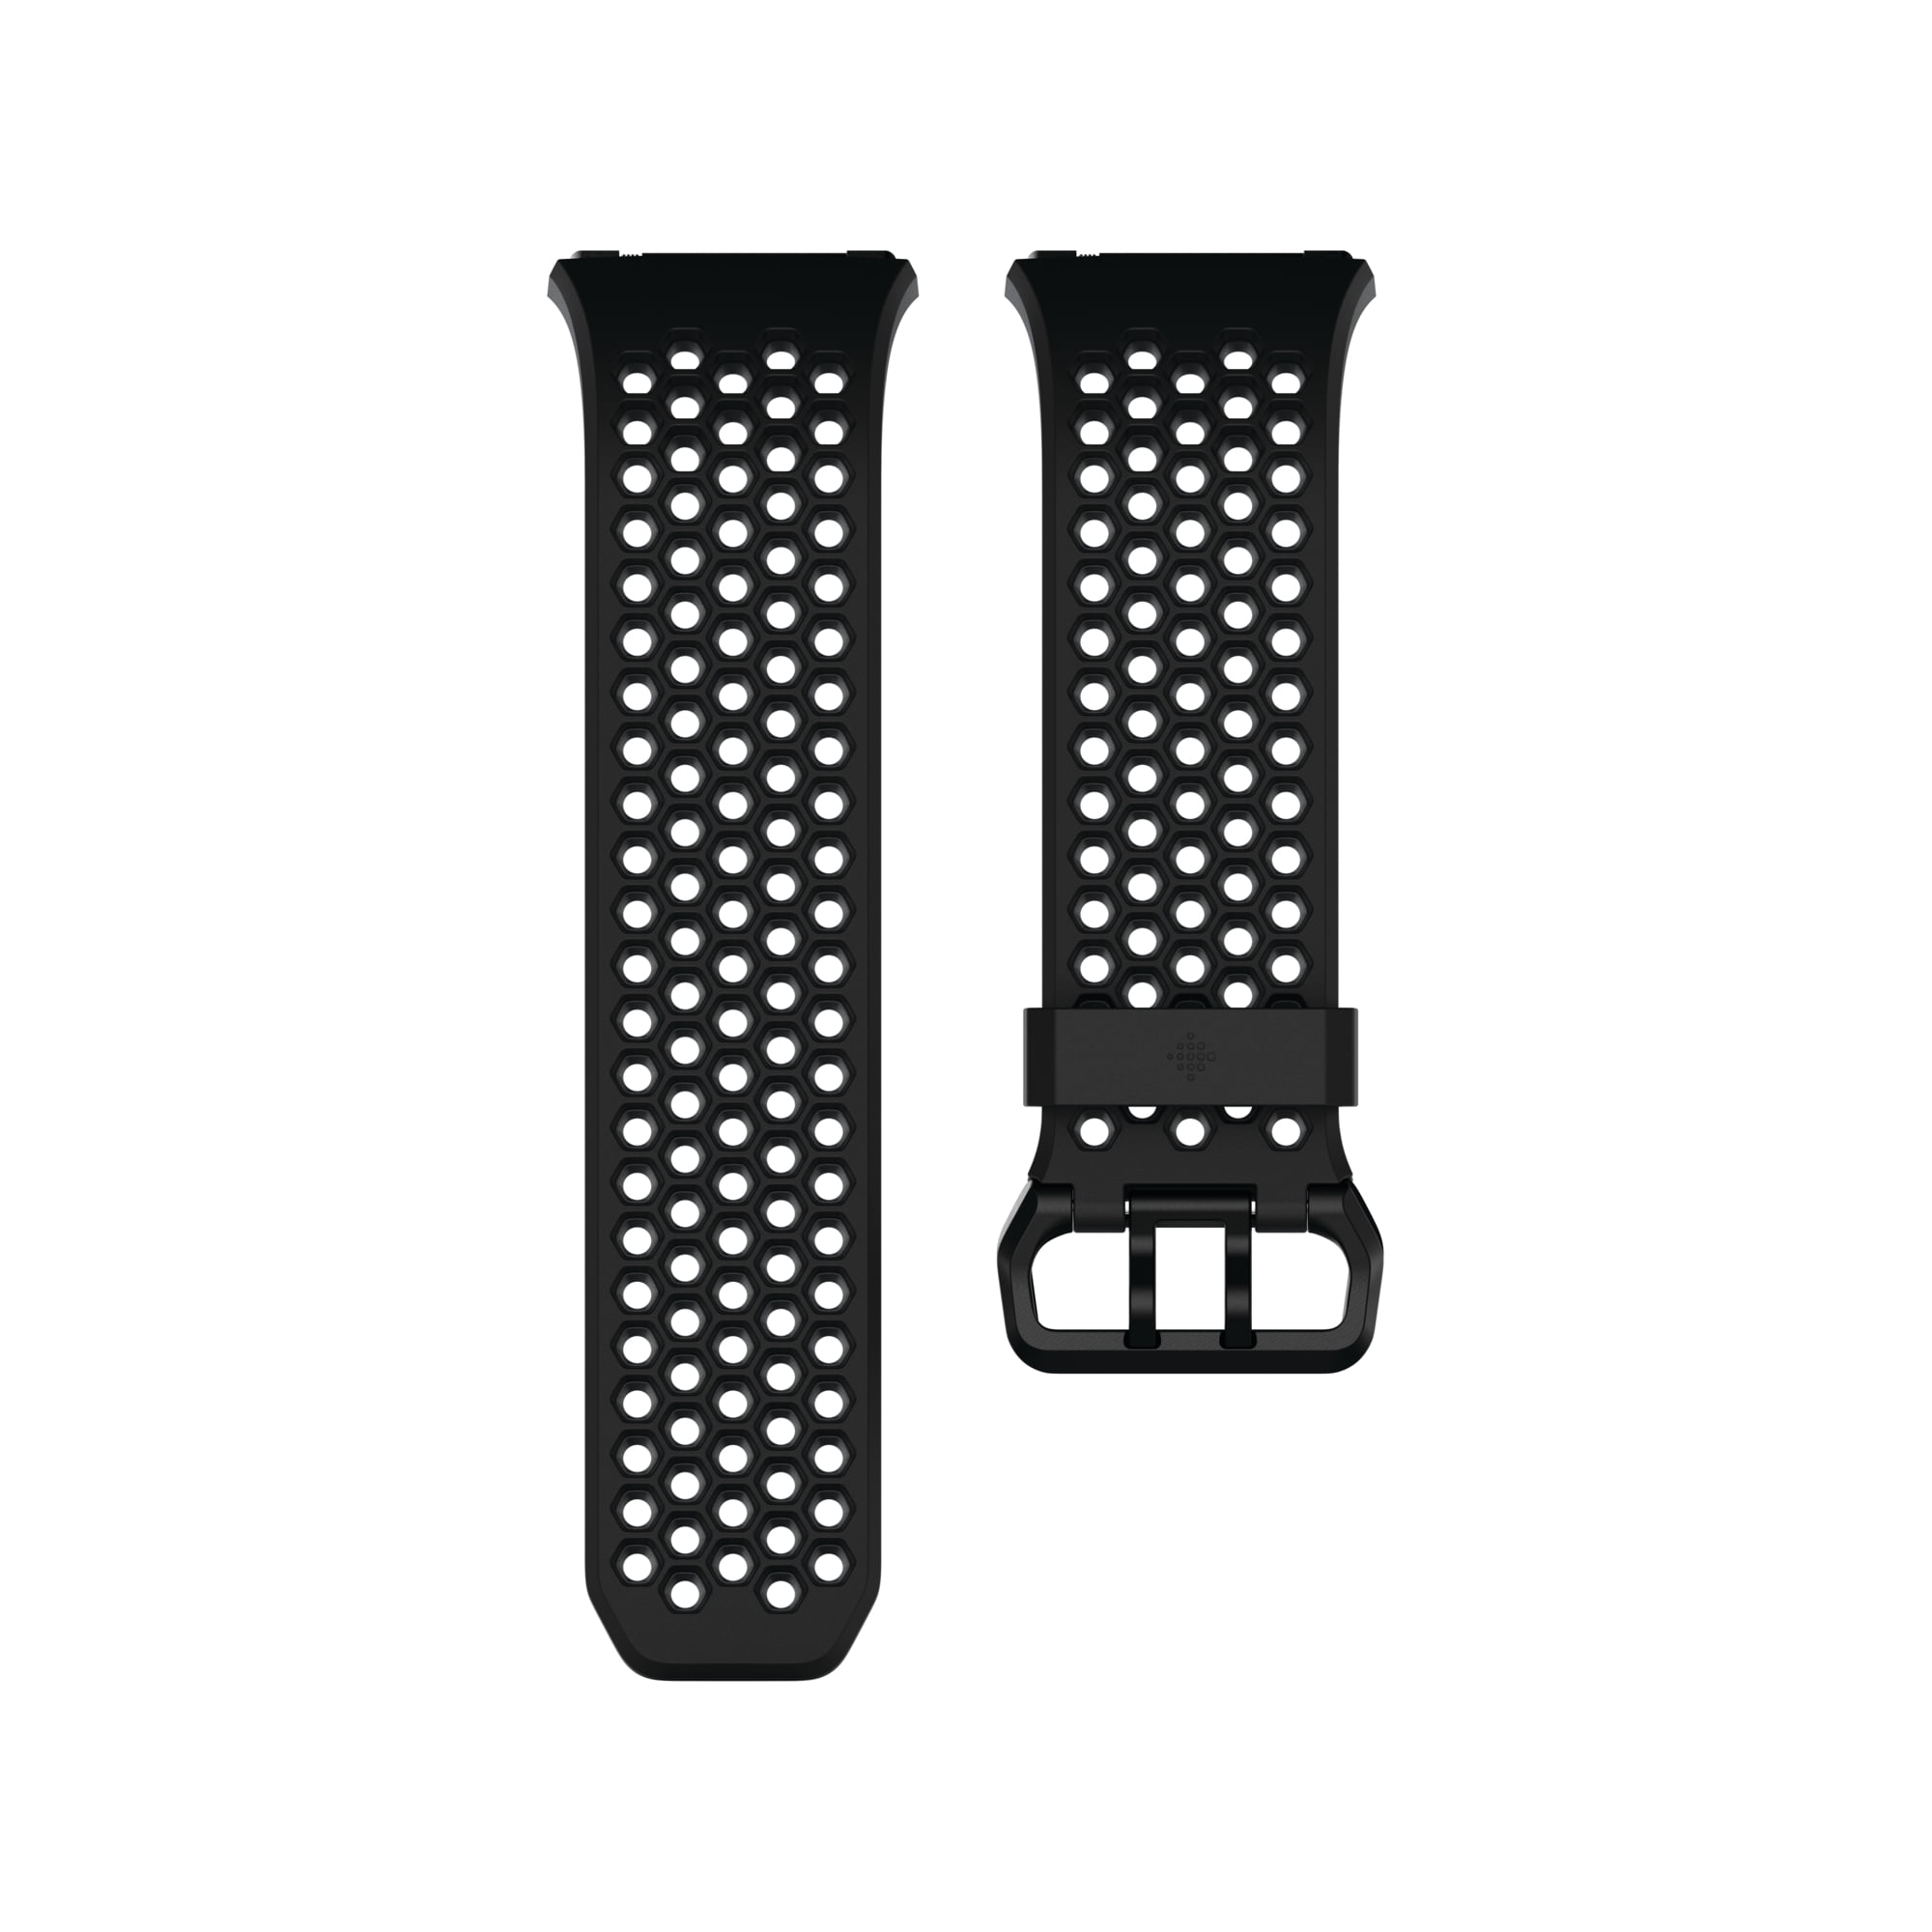 fitbit ionic accessories